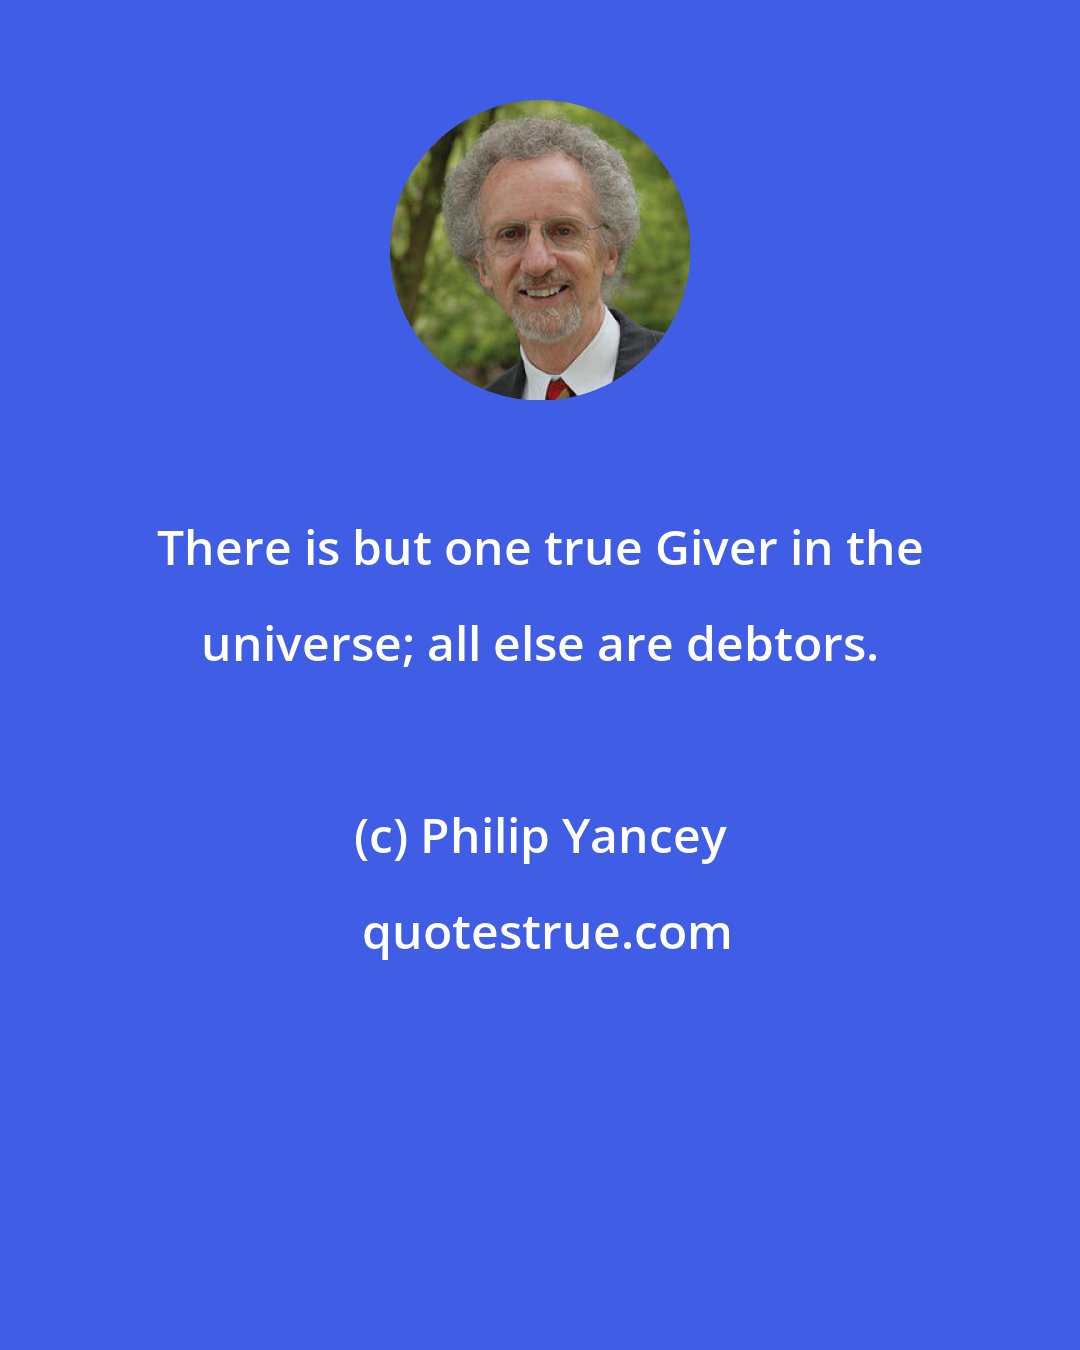 Philip Yancey: There is but one true Giver in the universe; all else are debtors.